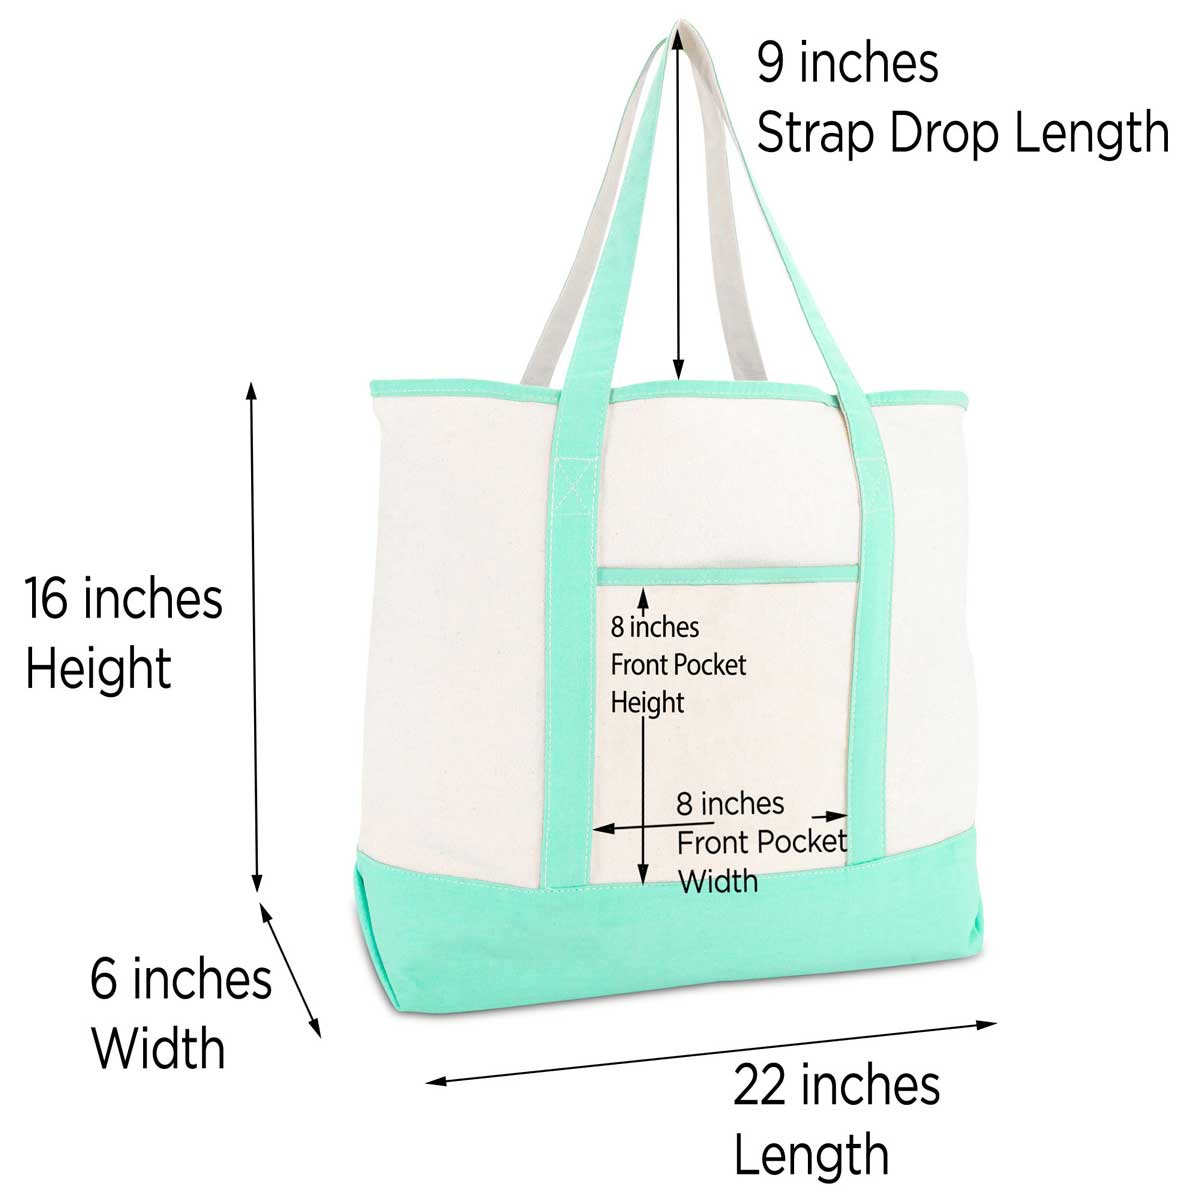 Dalix Monogram Tote Bag For Women Open Top Mint Green Personalized Letter A-Z